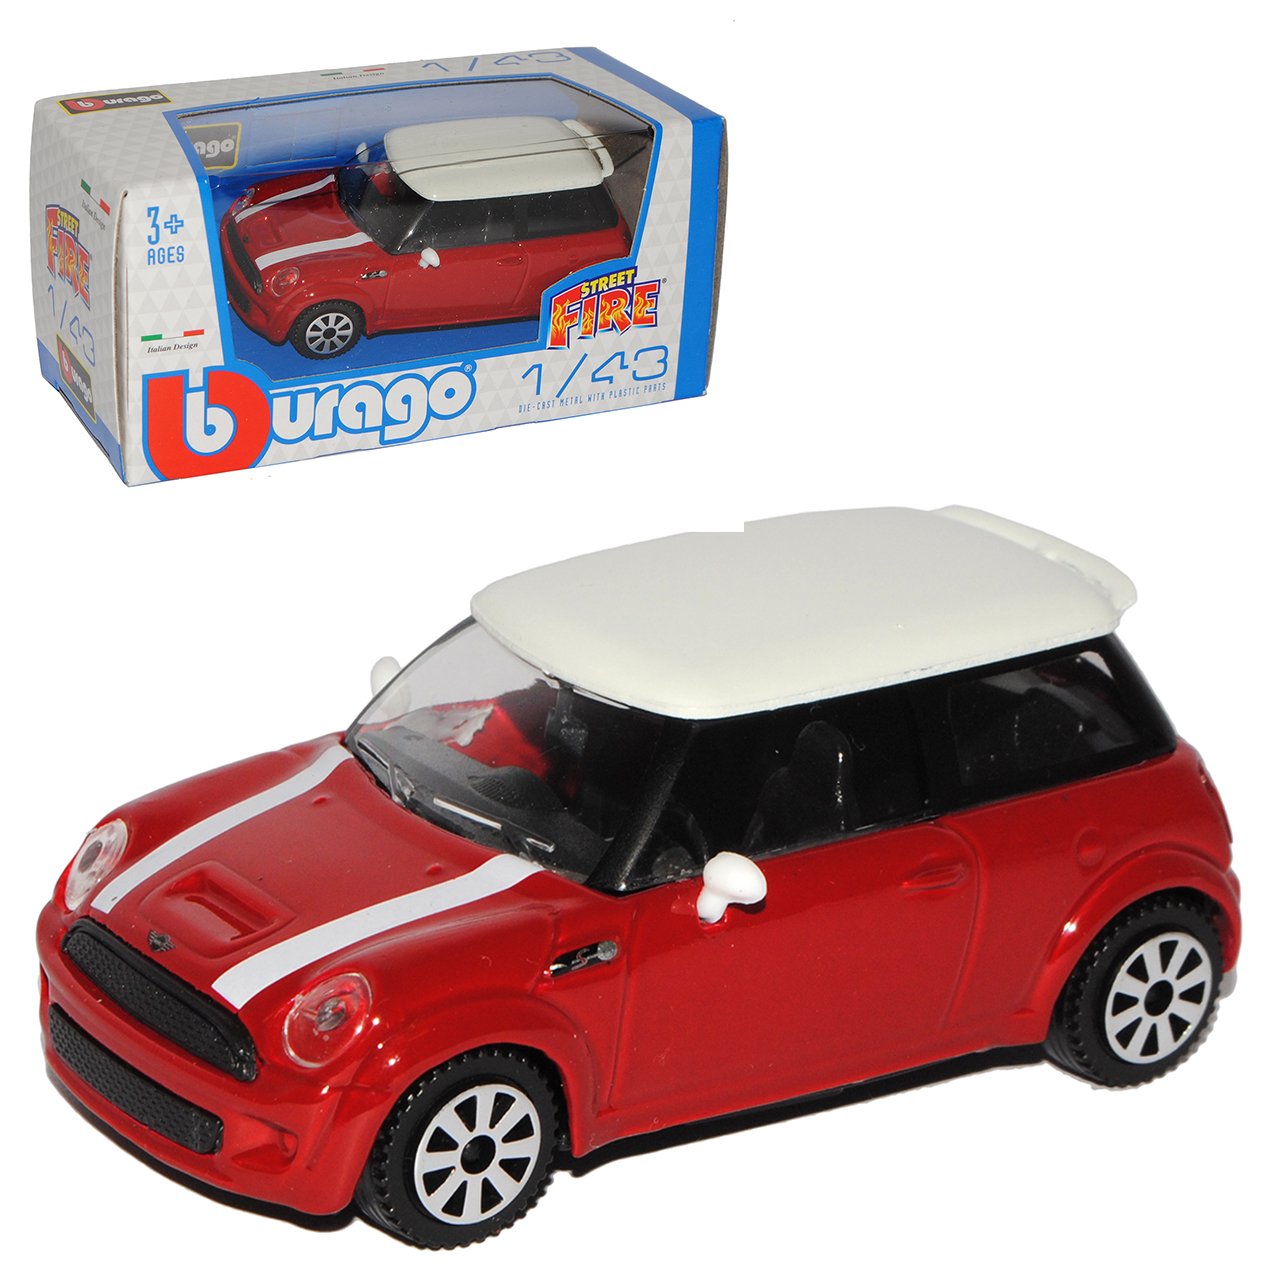 Mini Cooper S Red White Roof R56 From 2006 1/43 Bburago Model Car With Or W